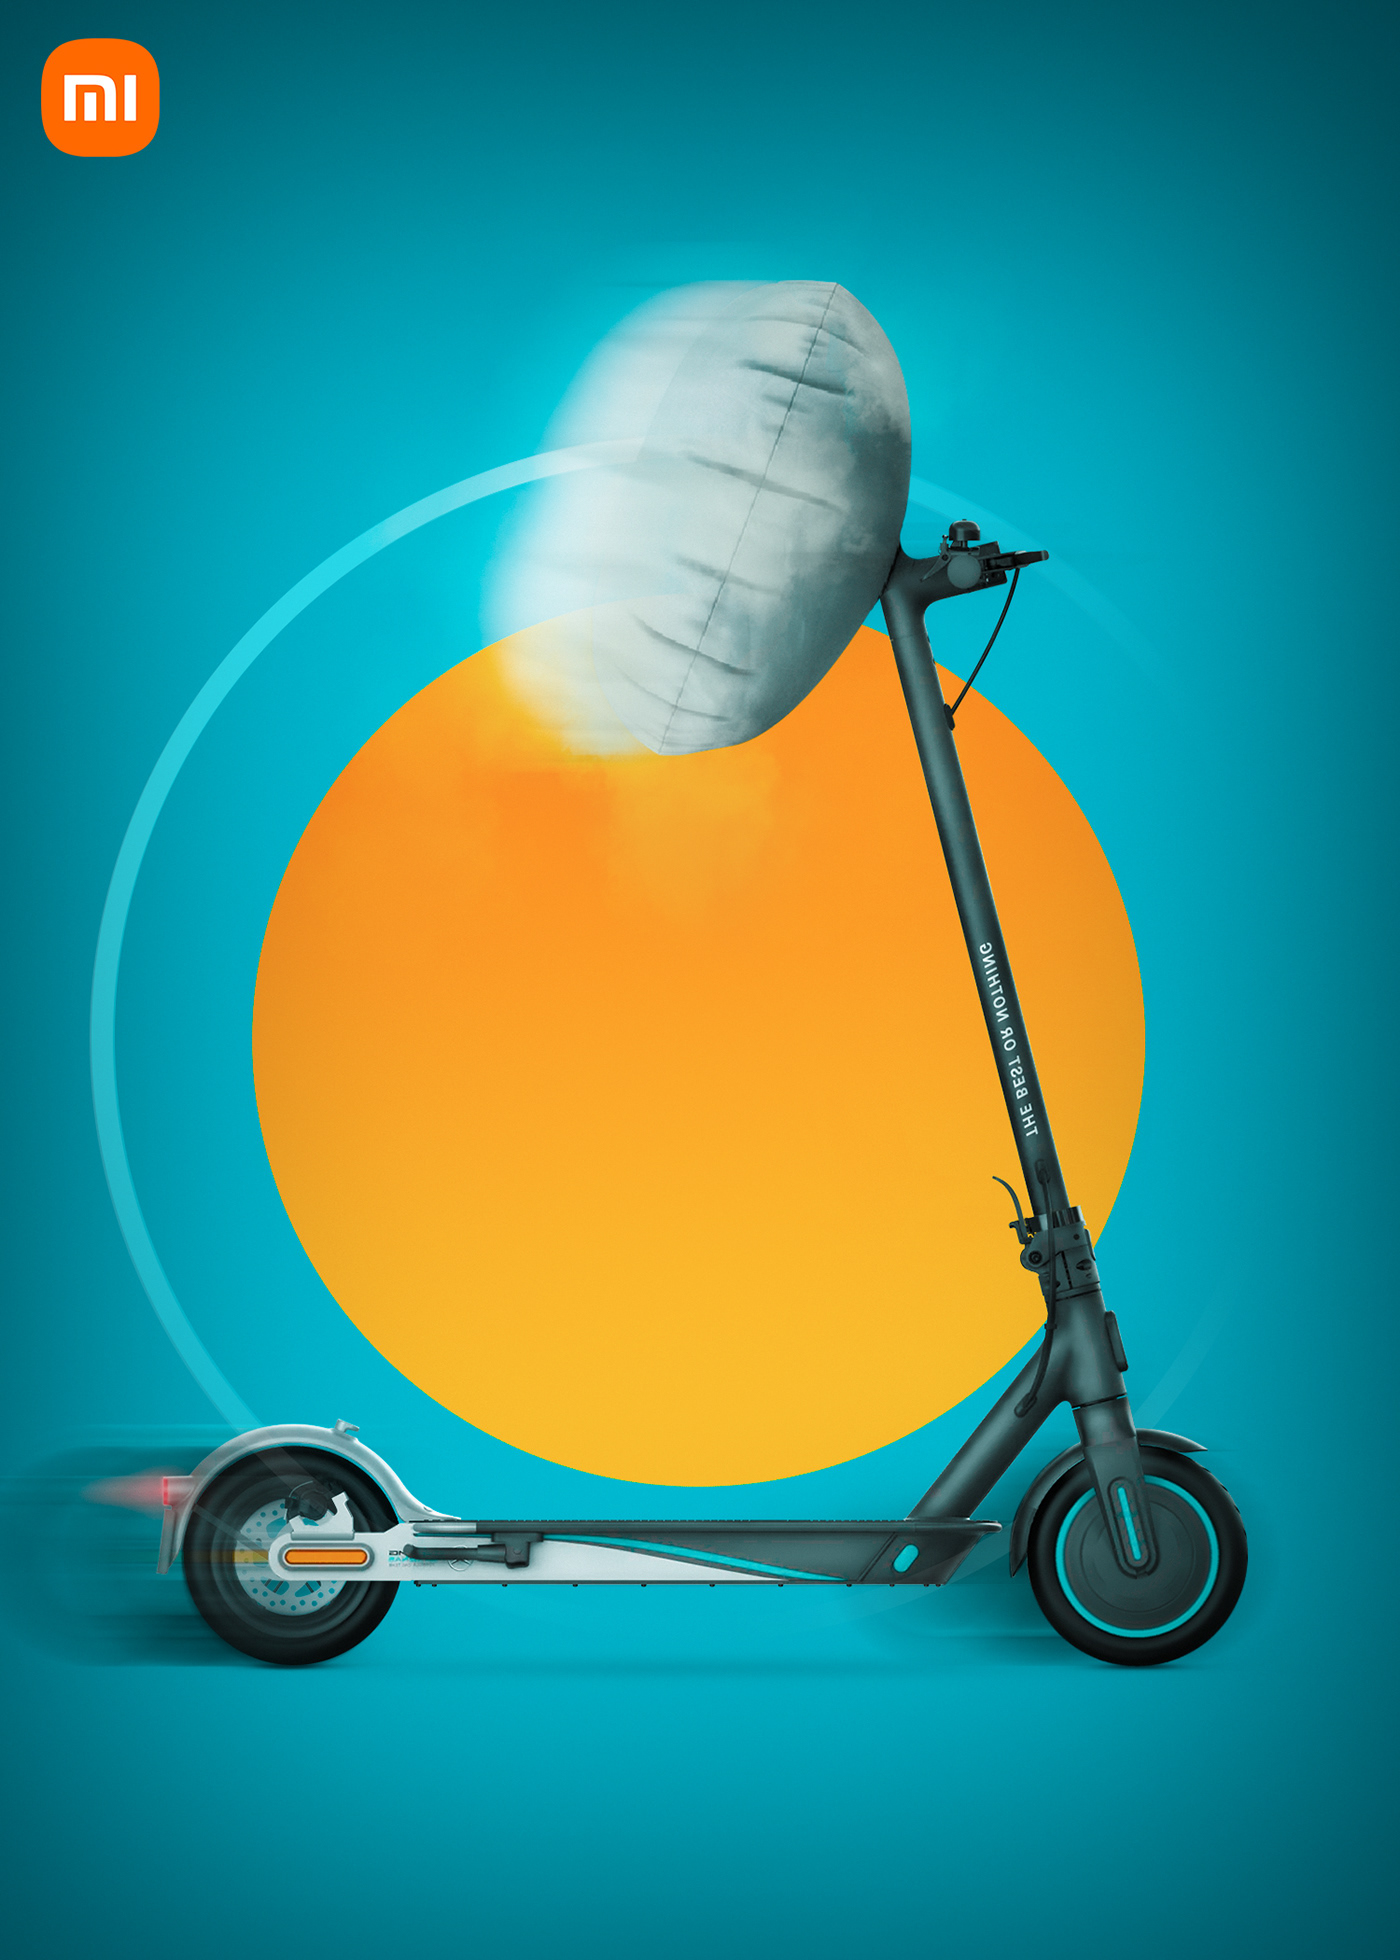 ads Advertising  Airbag blue exaggerated graphic design  poster safety Scooter xiaomi